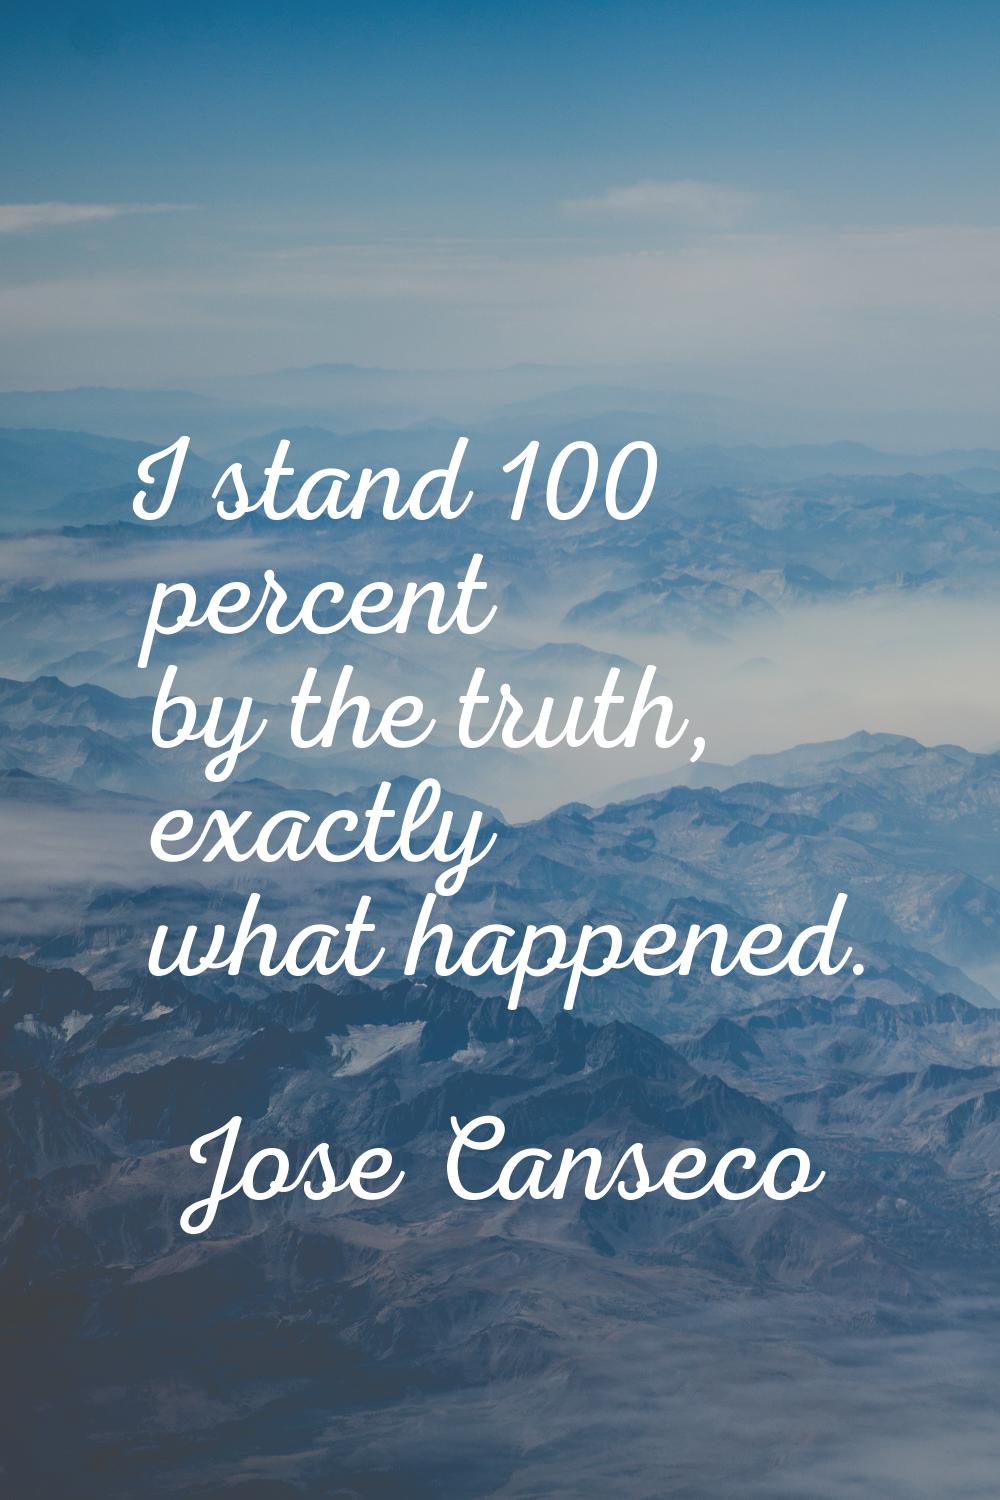 I stand 100 percent by the truth, exactly what happened.